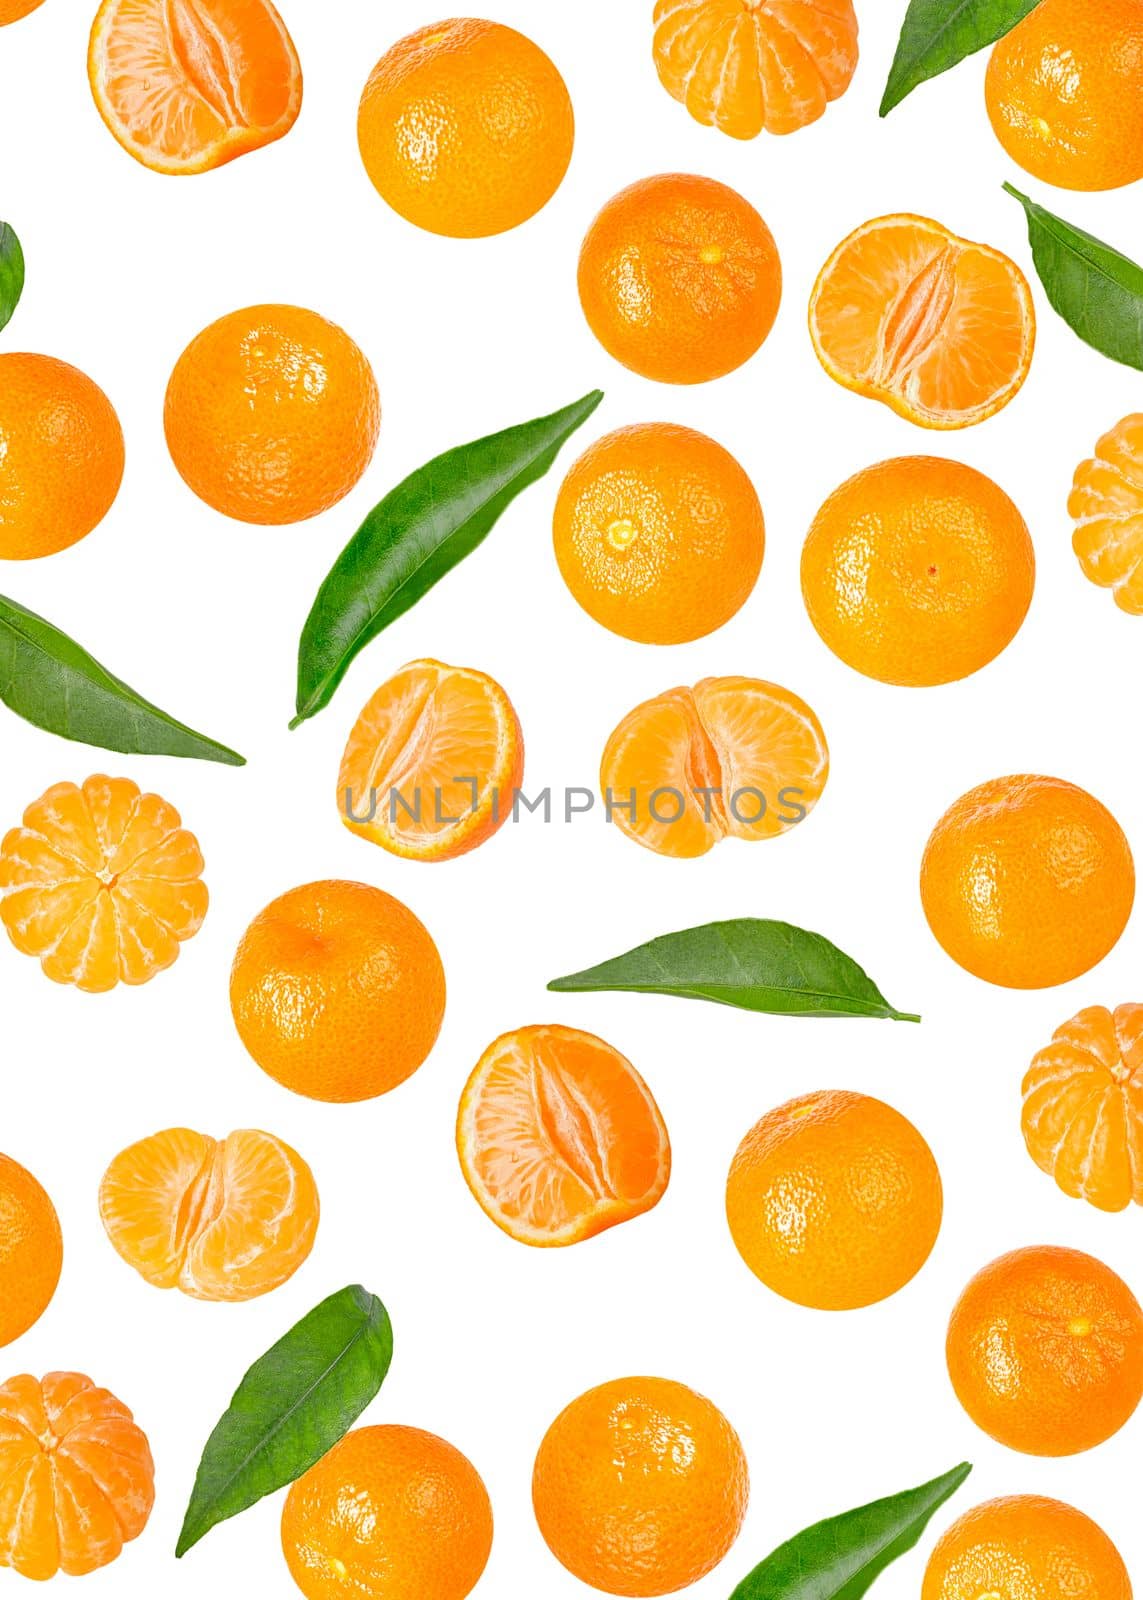 Falling mandarin on white surface for advertisement by Ciorba